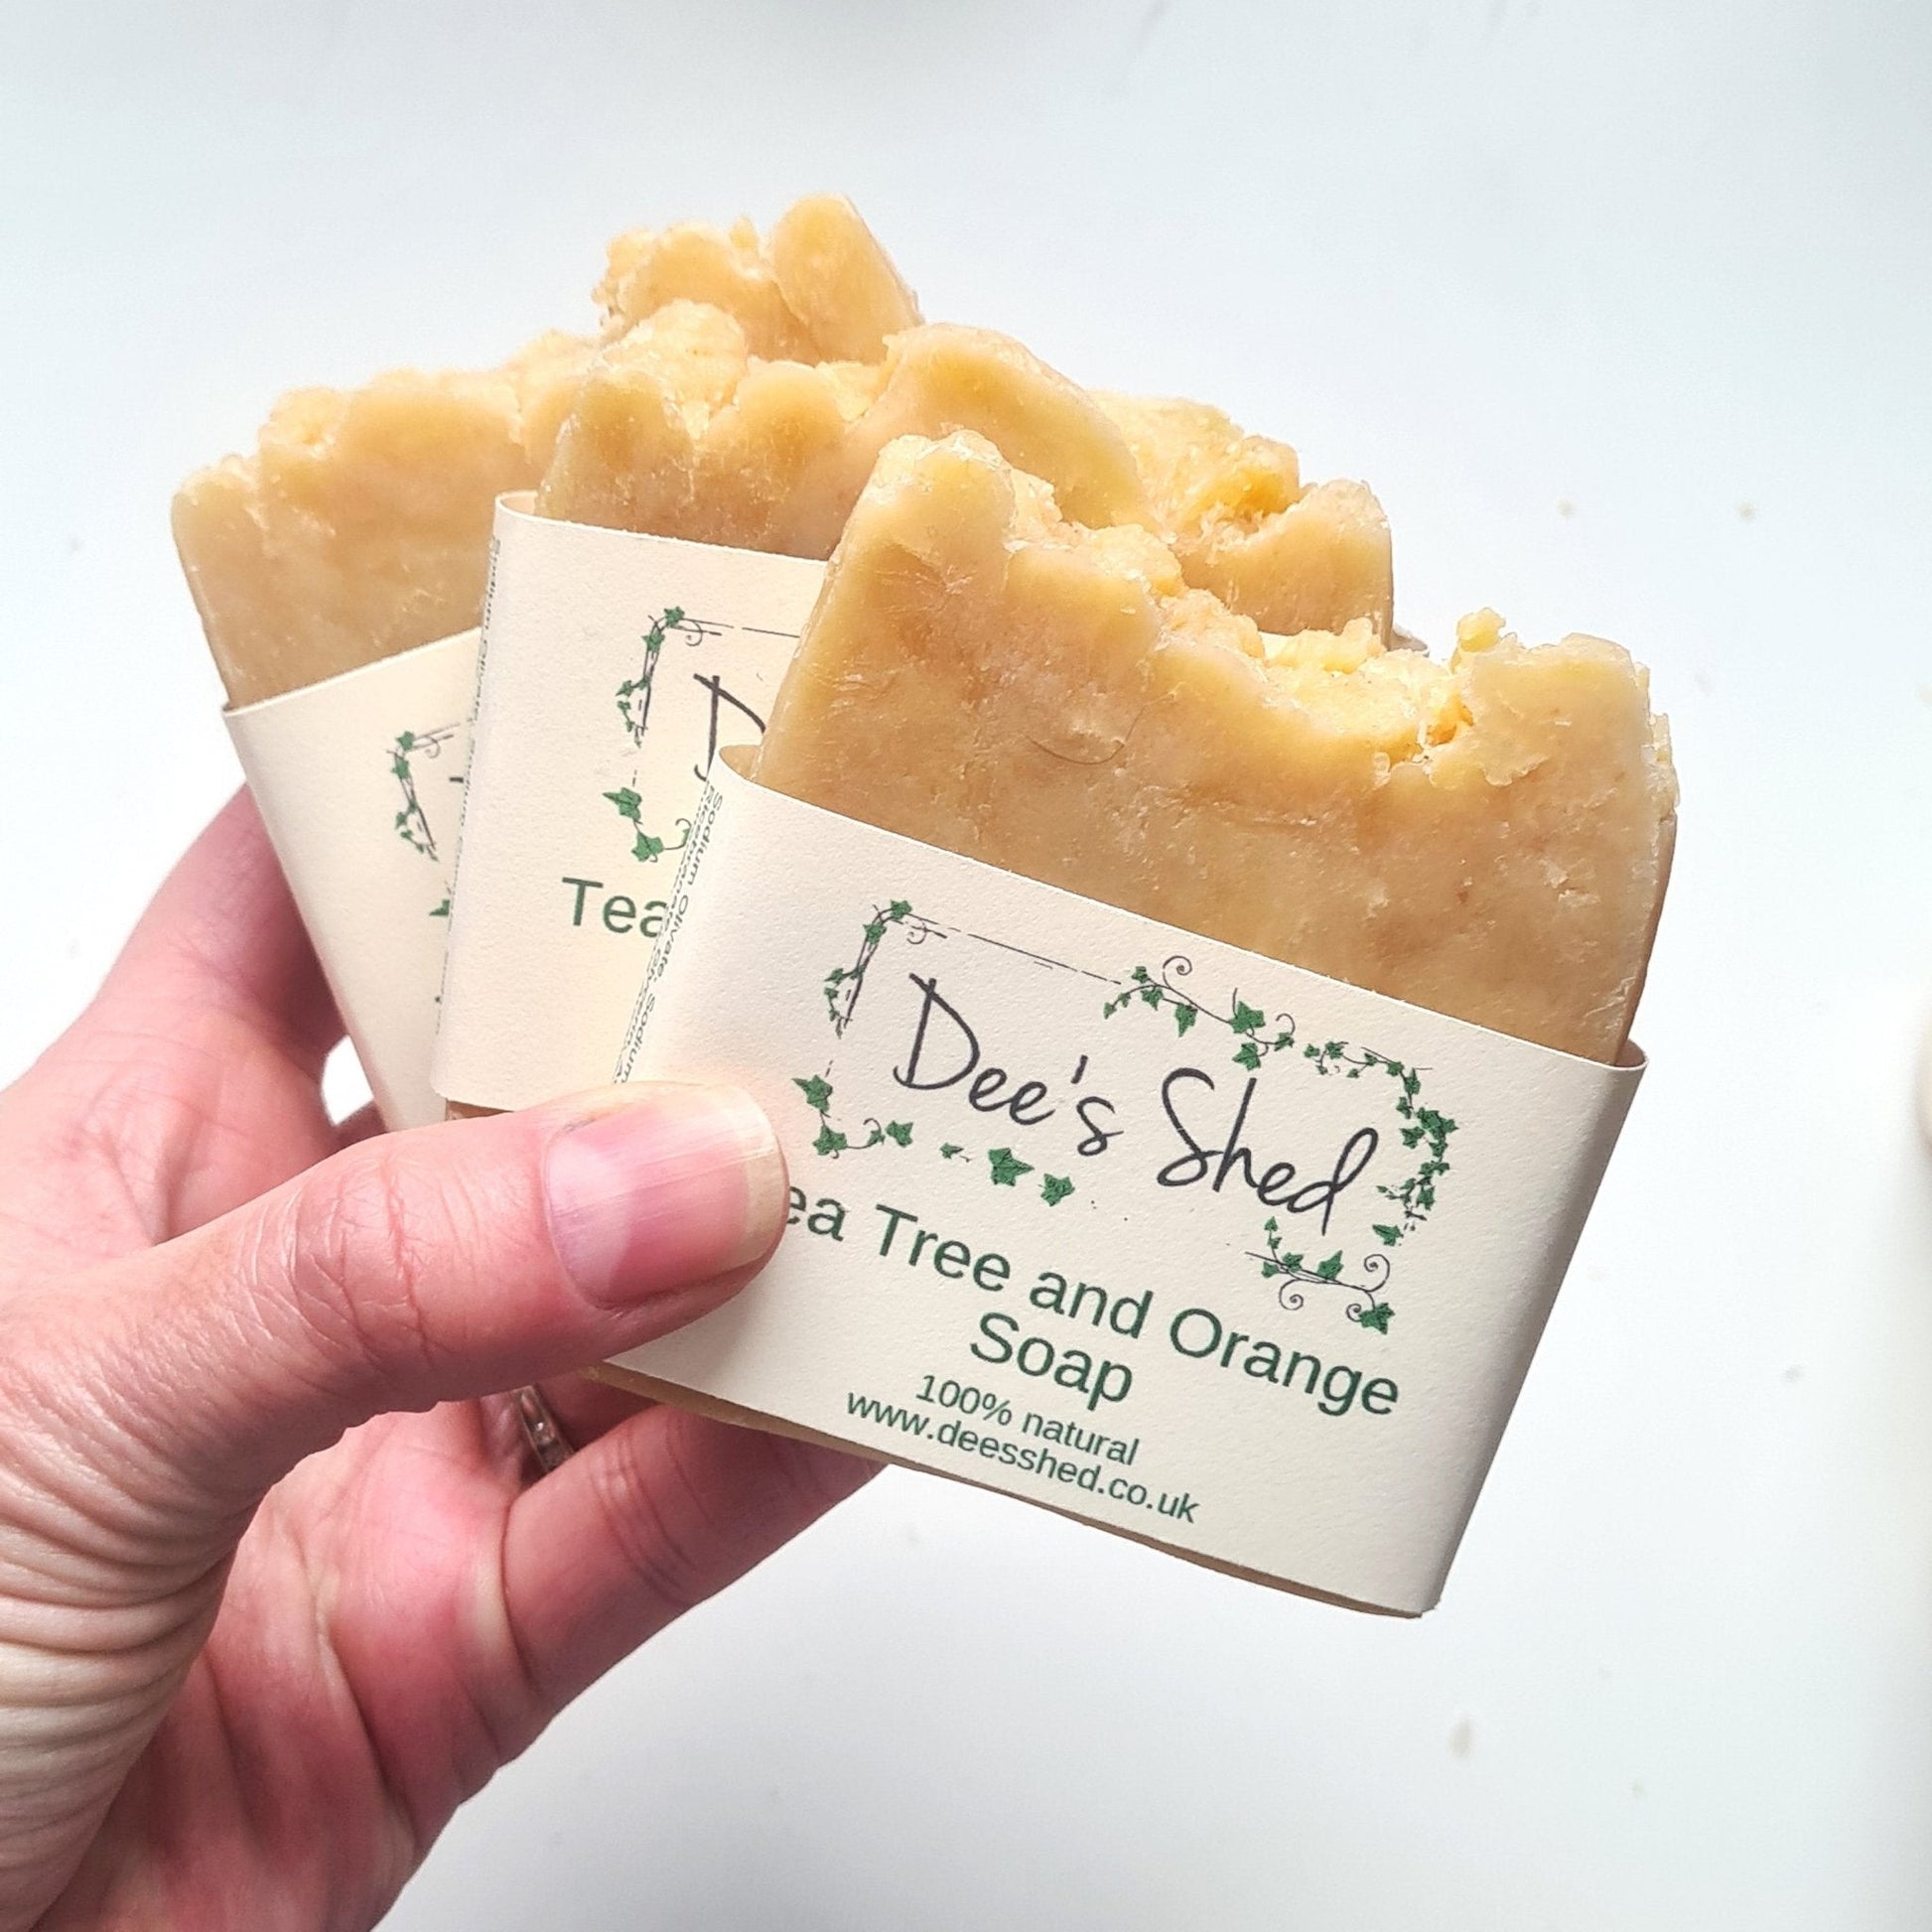 Soap - Tea Tree and Orange - Dees Shed